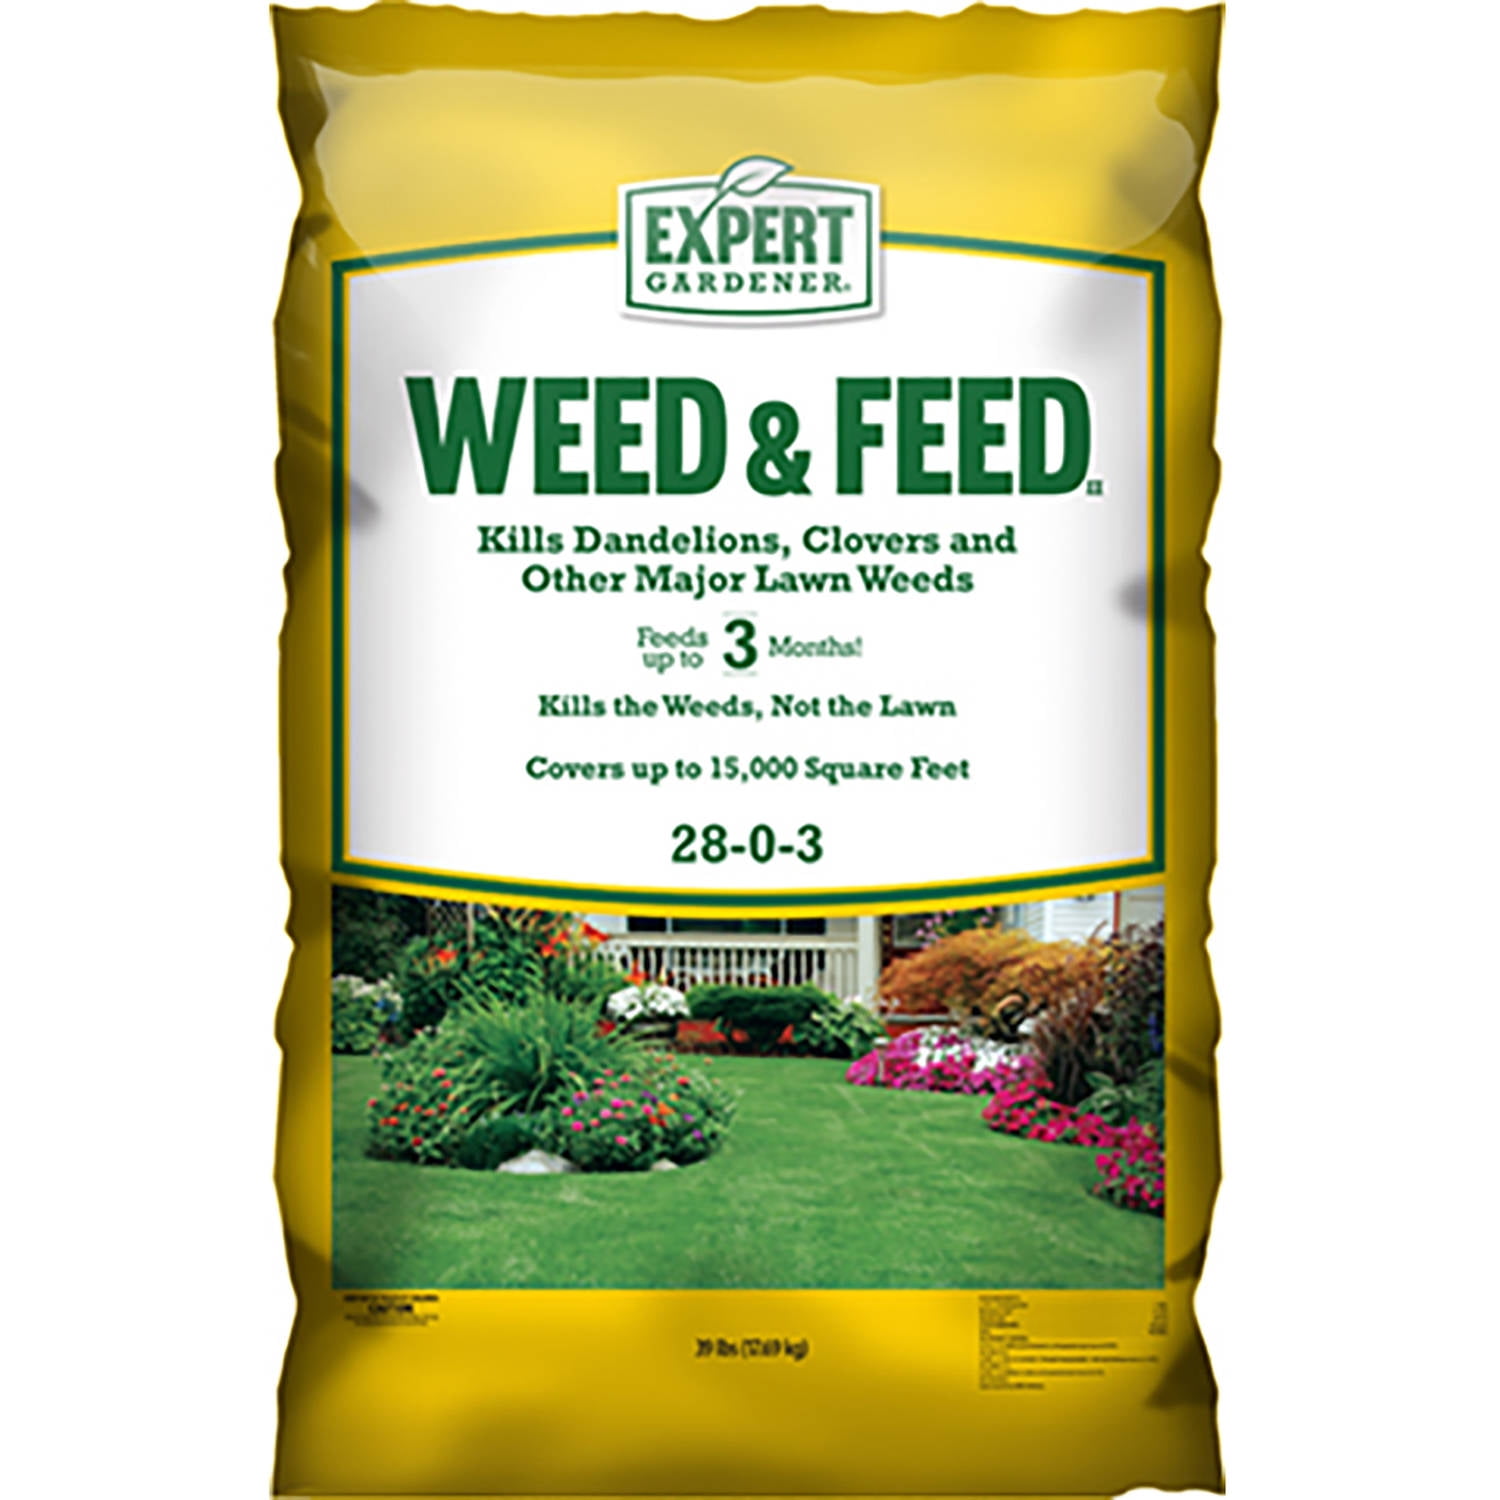 Lawn weed and feed bulk